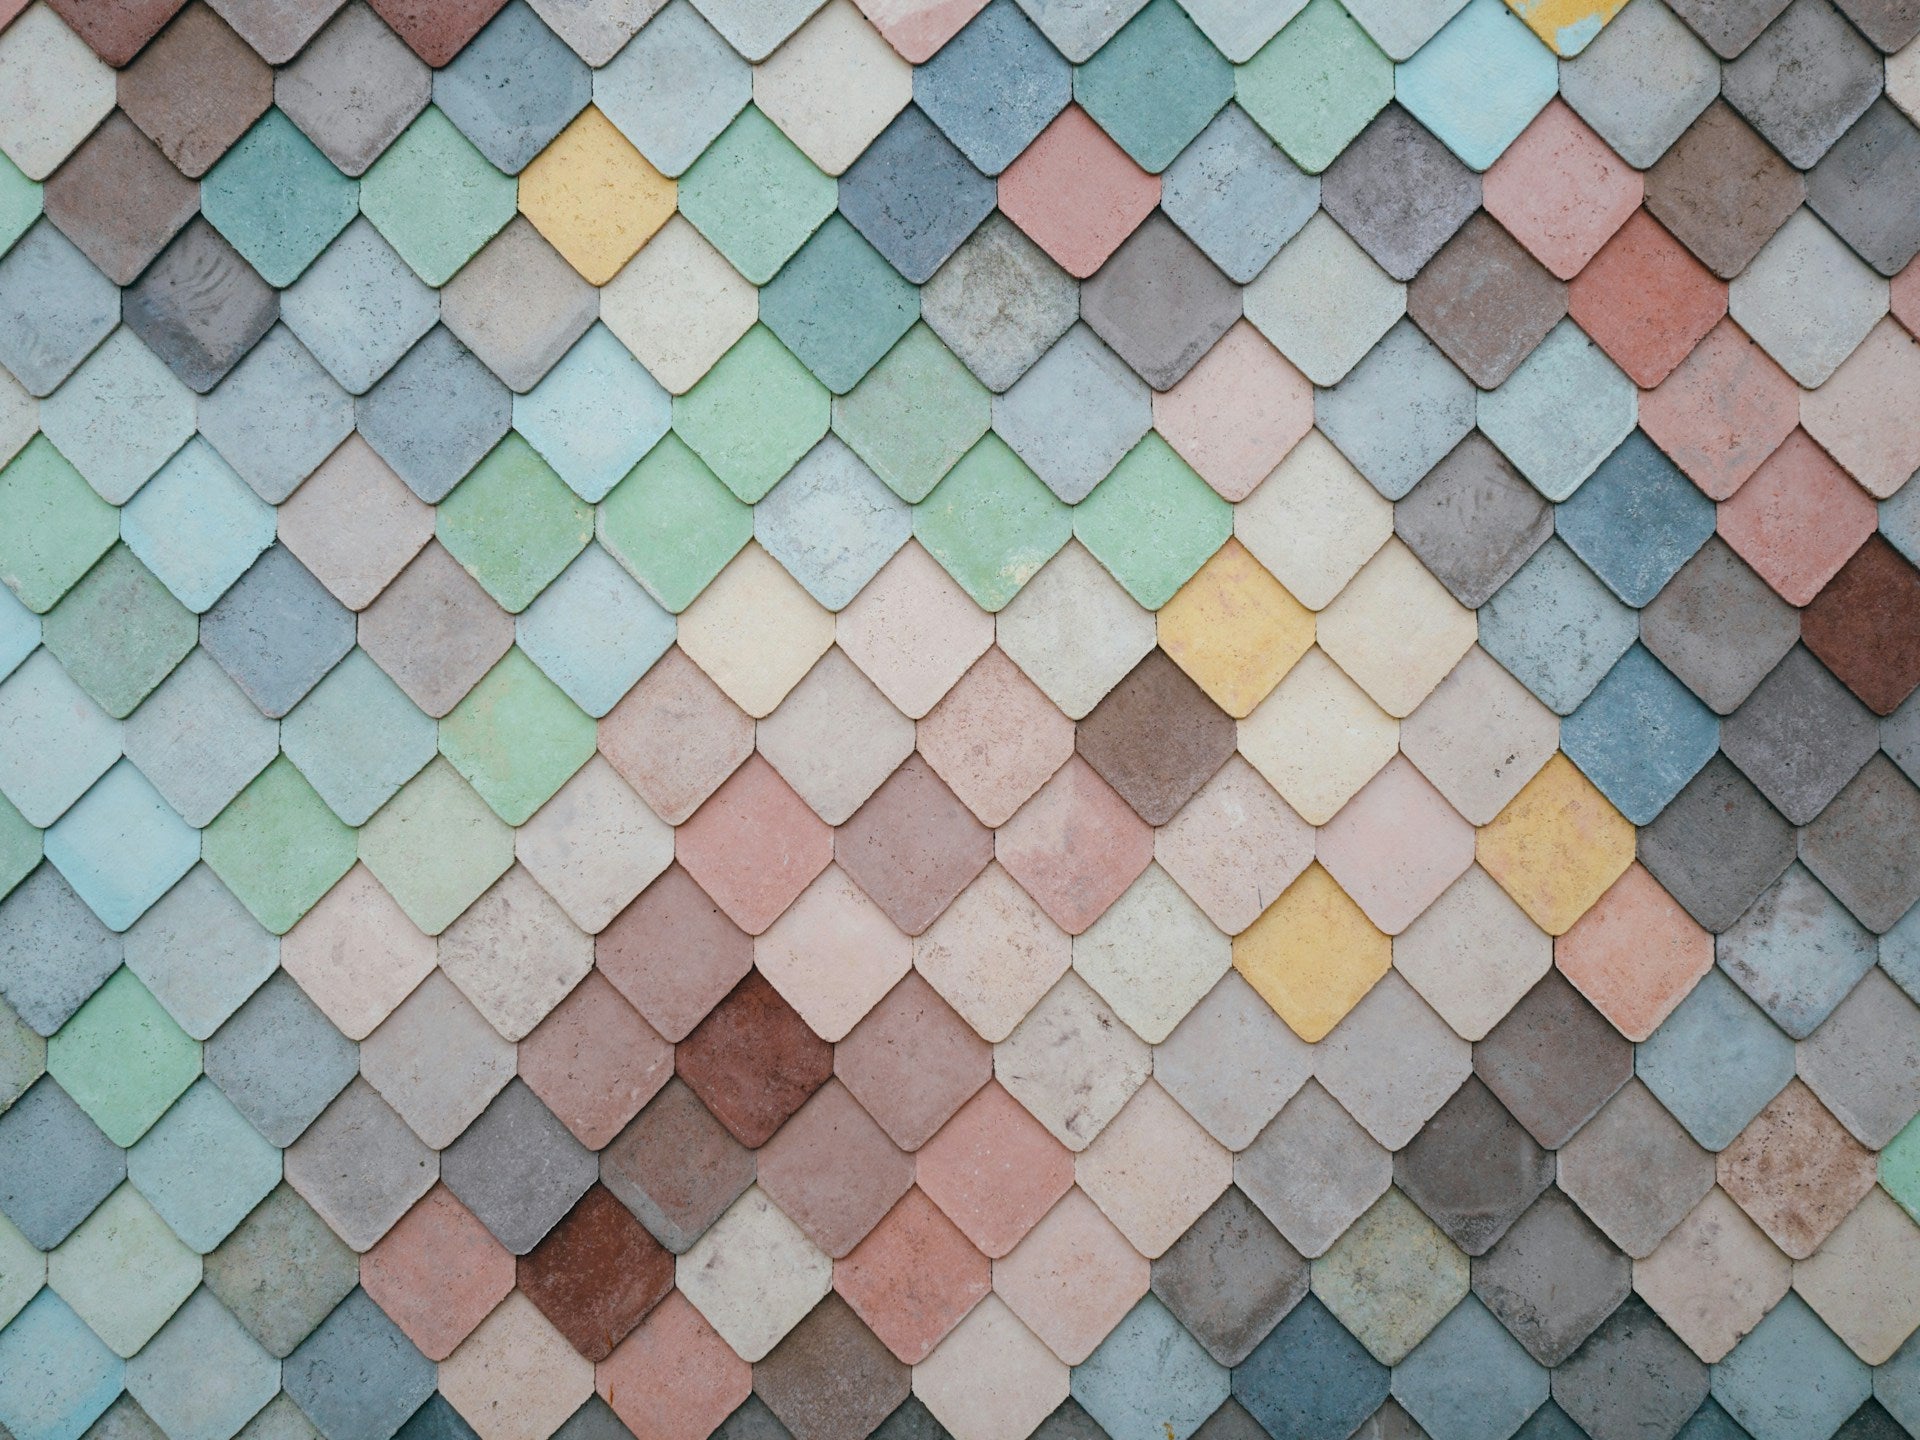 Layered pieces of colorful tiles.